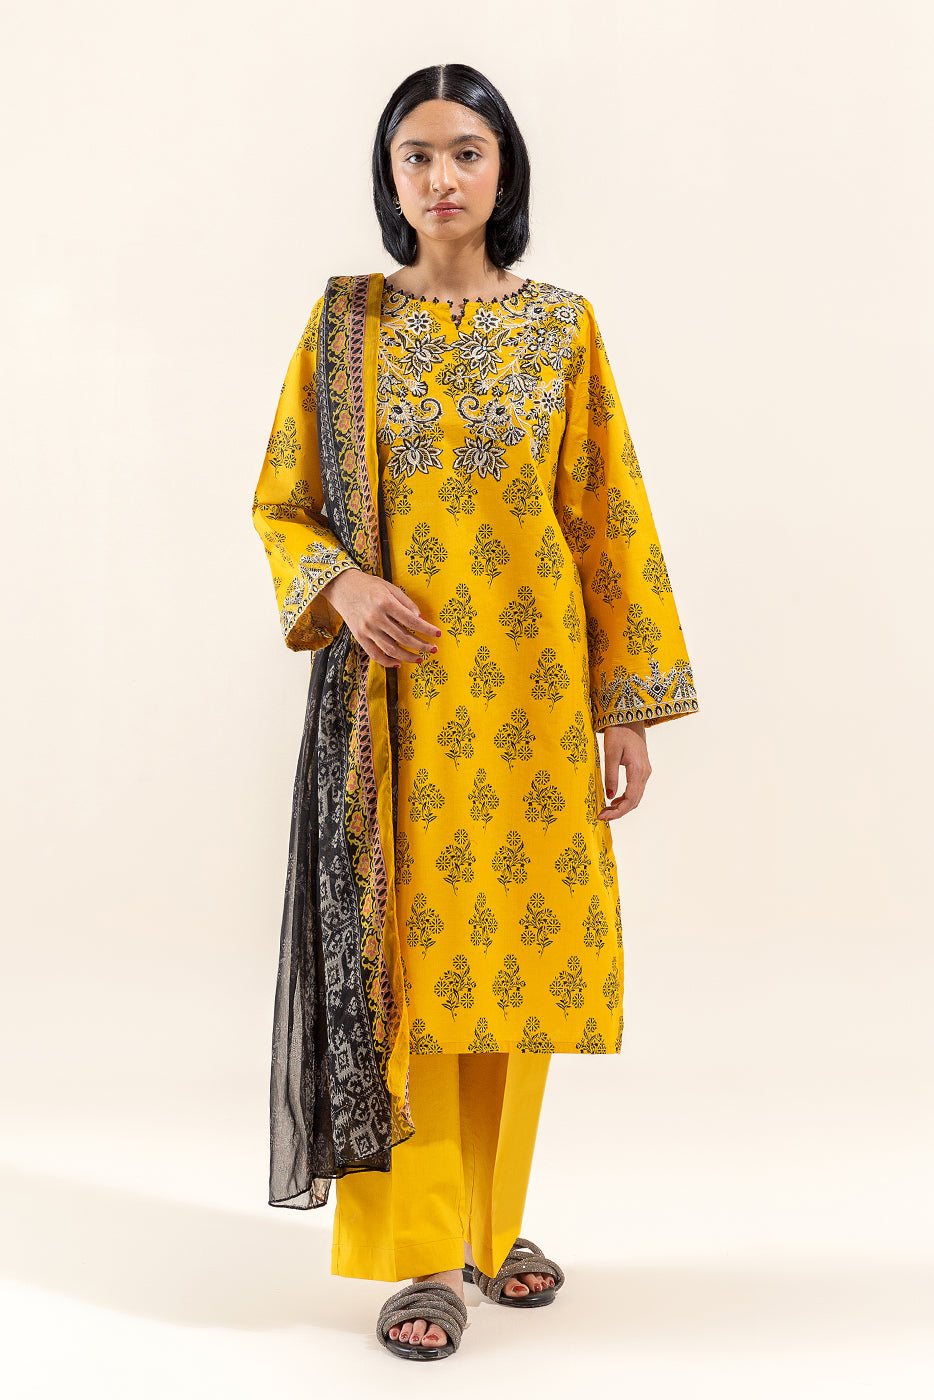 2 PIECE EMBROIDERED LAWN SUIT-HARVEST GOLD (UNSTITCHED)